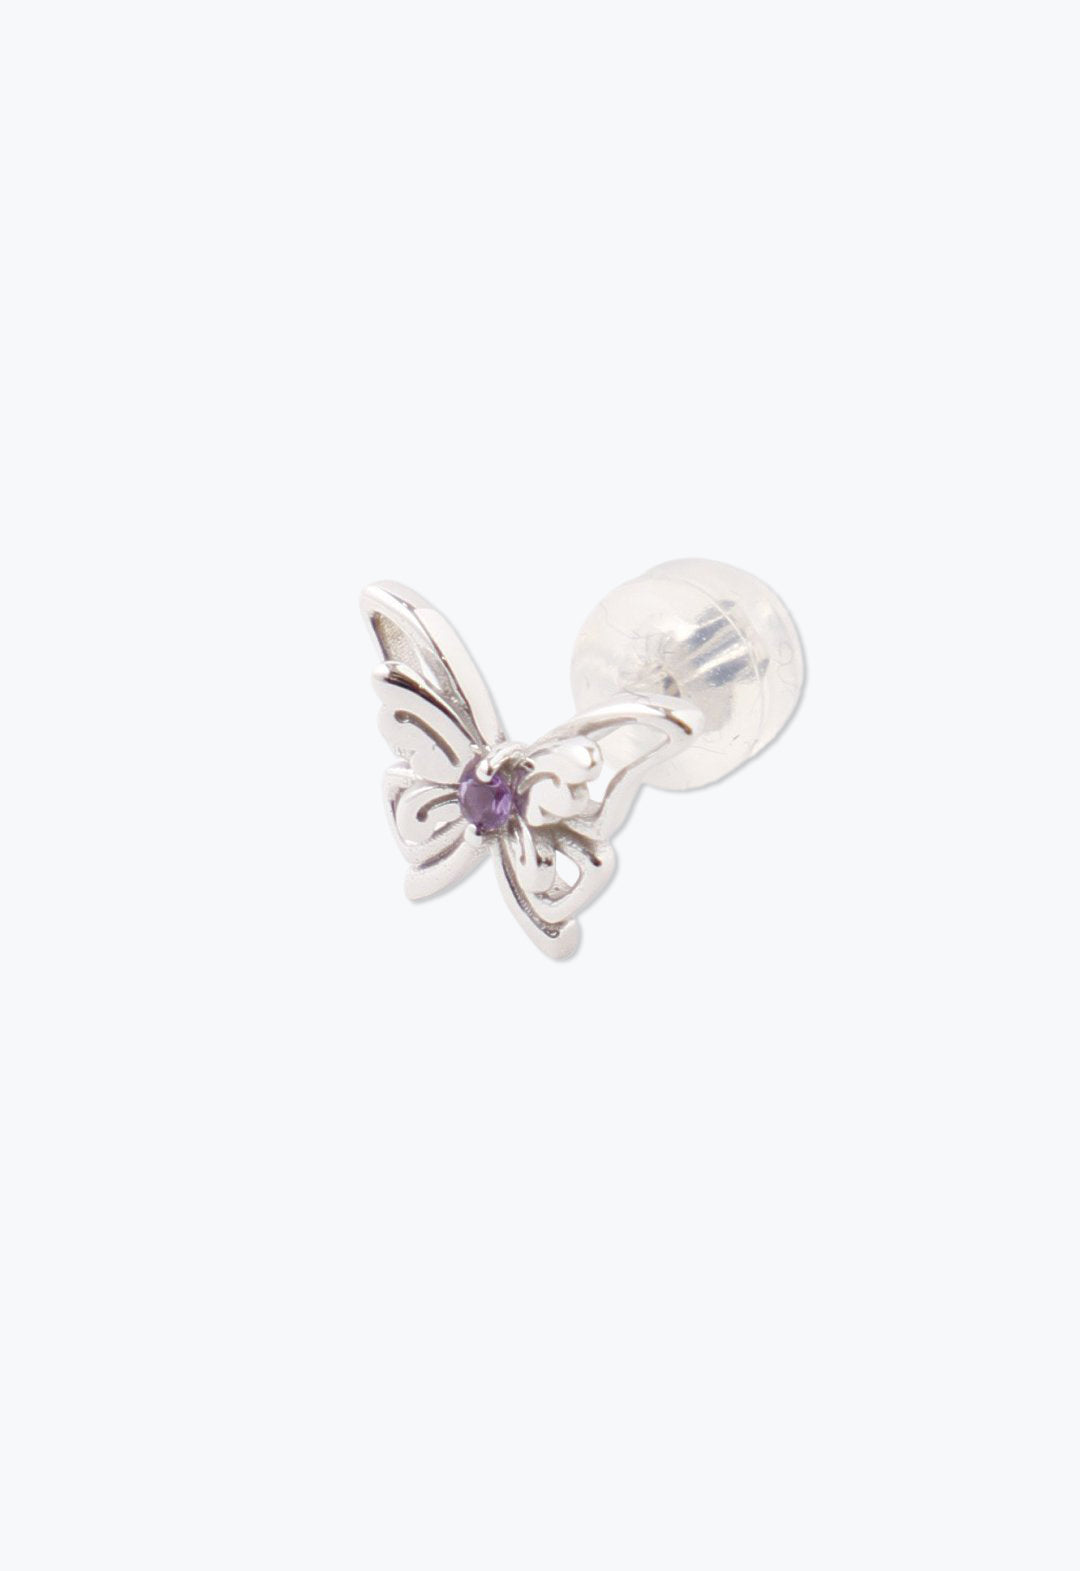 Ribbon Butterfly Earing Silver are claps earing Rhodium Plated metal, an Amethyst